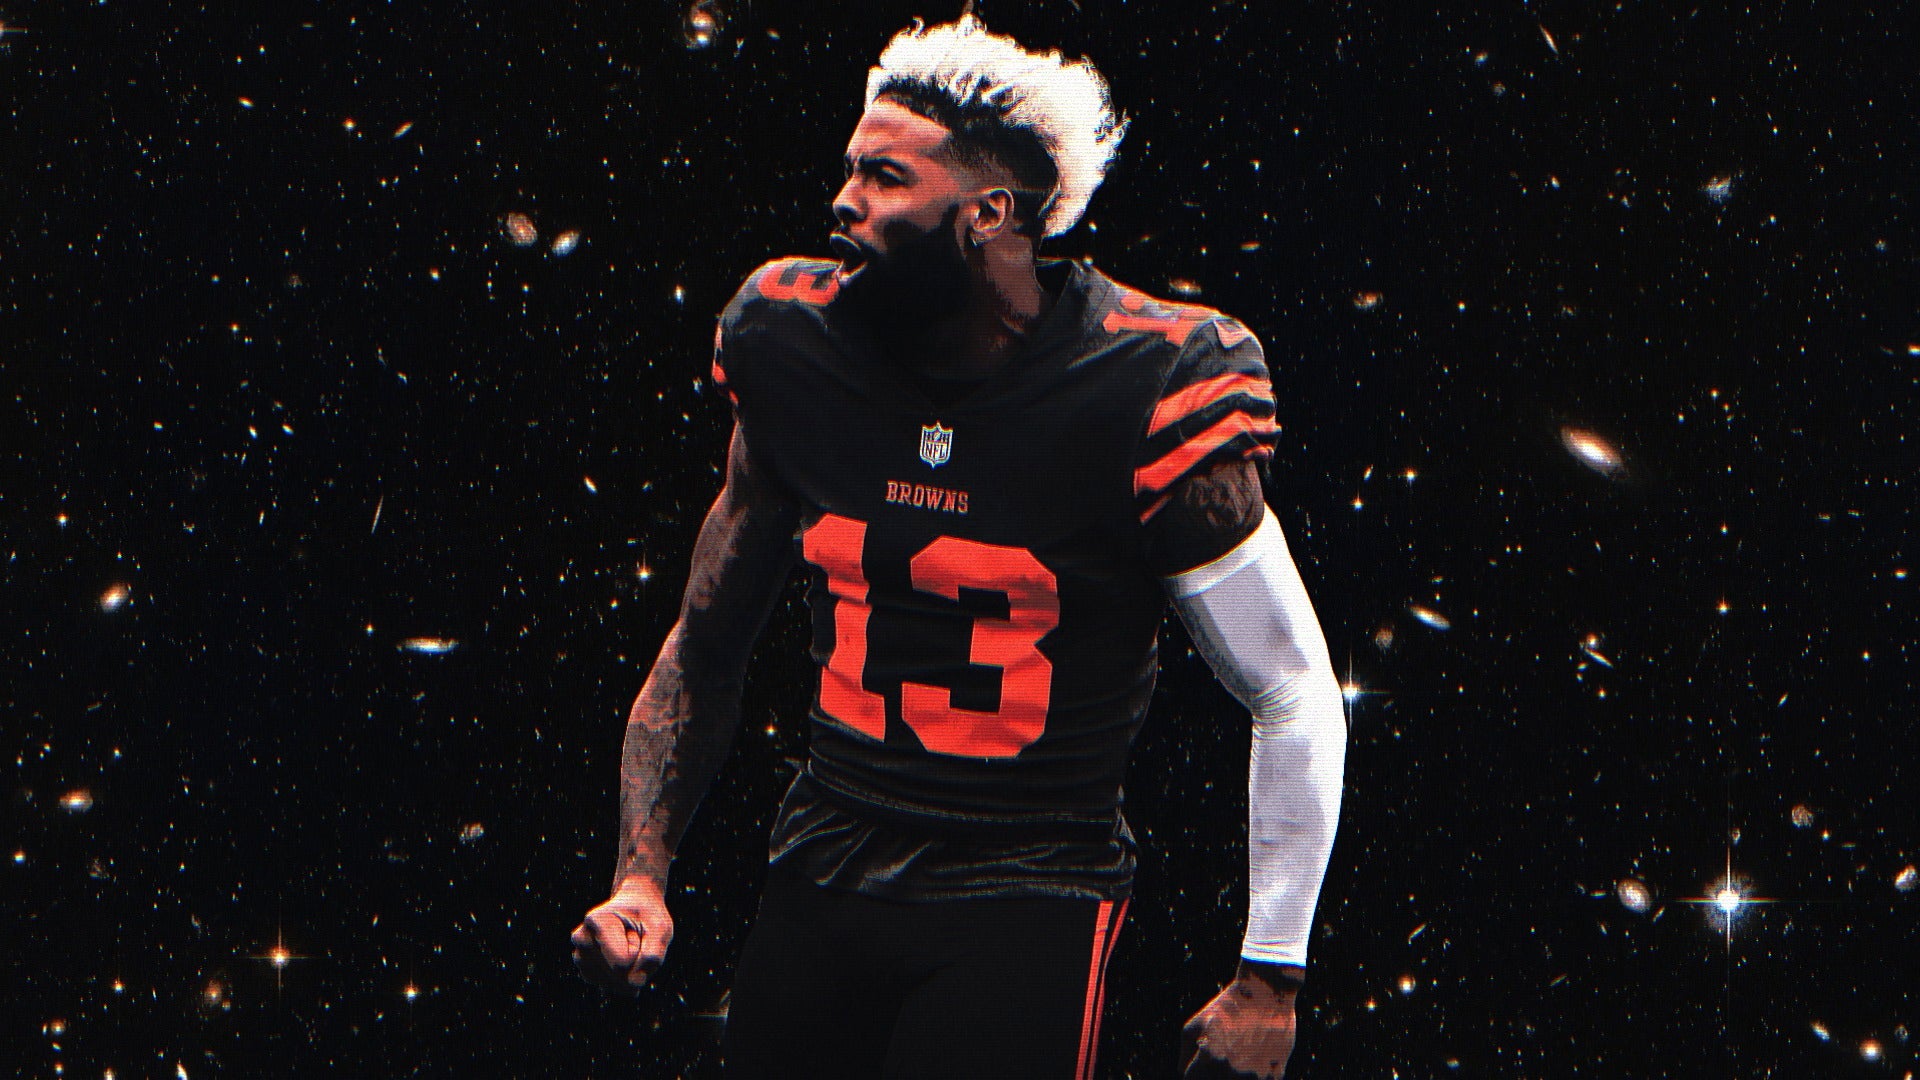 Put Together An Obj Wallpaper Decided To Share Ment If I